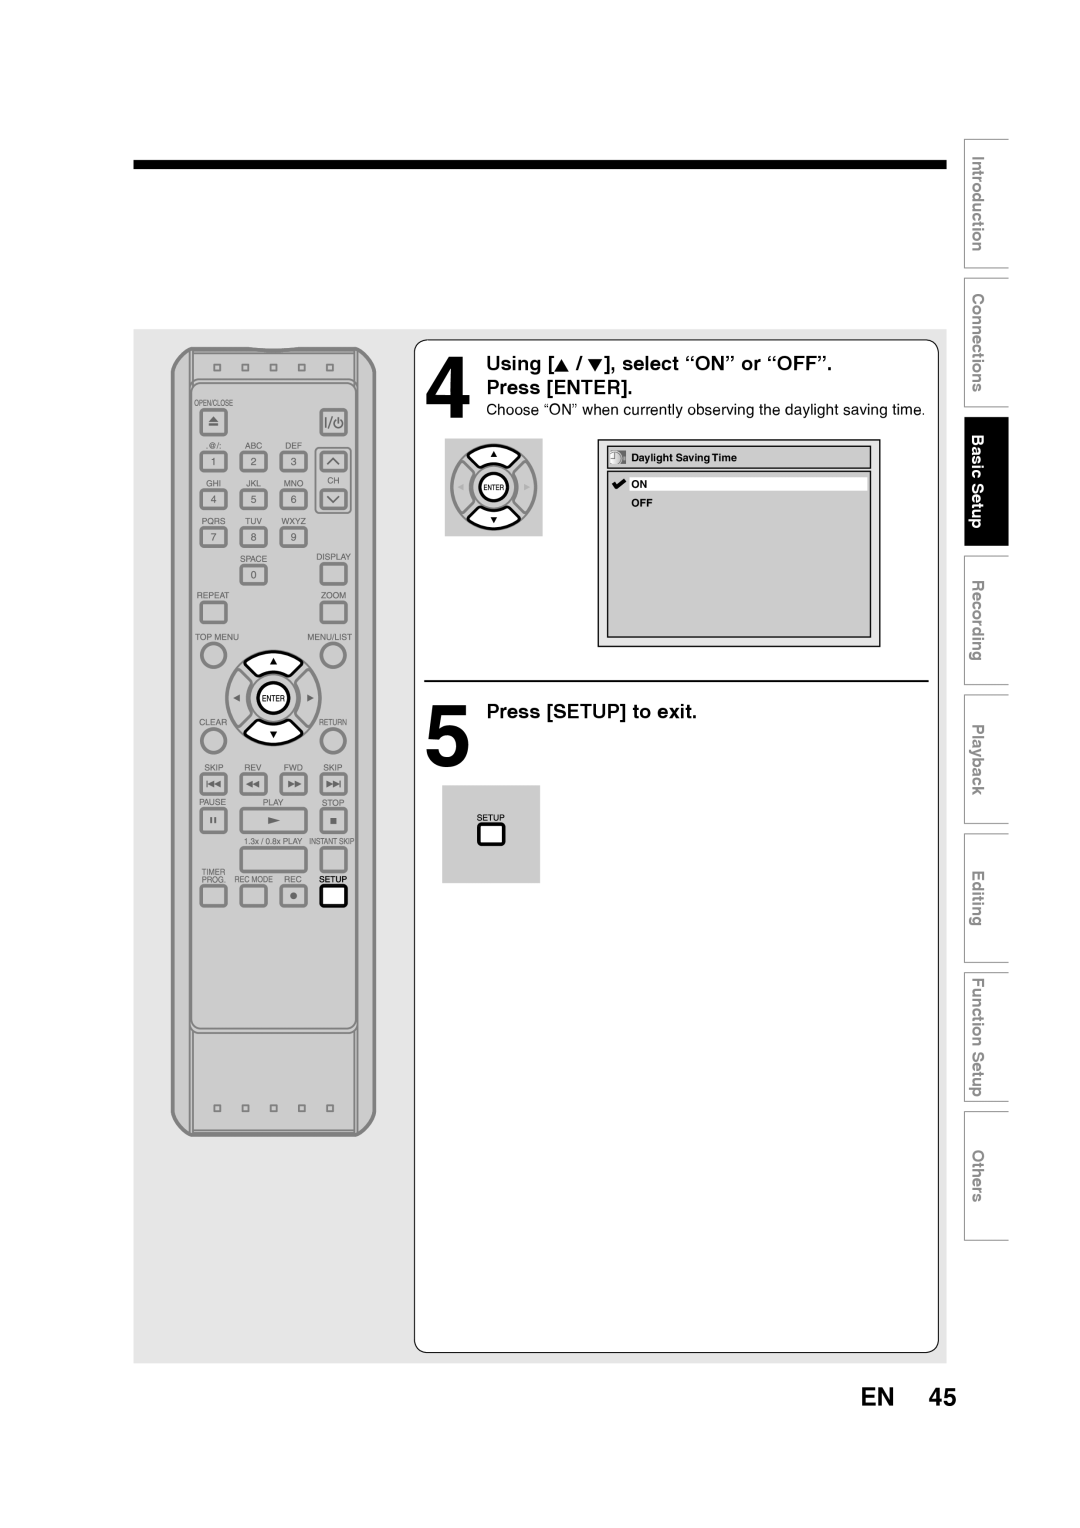 Toshiba D-RW2SU/D-RW2SC Using K / L, select “ON” or “OFF” Press ENTER, Press SETUP to exit, Editing Function Setup Others 